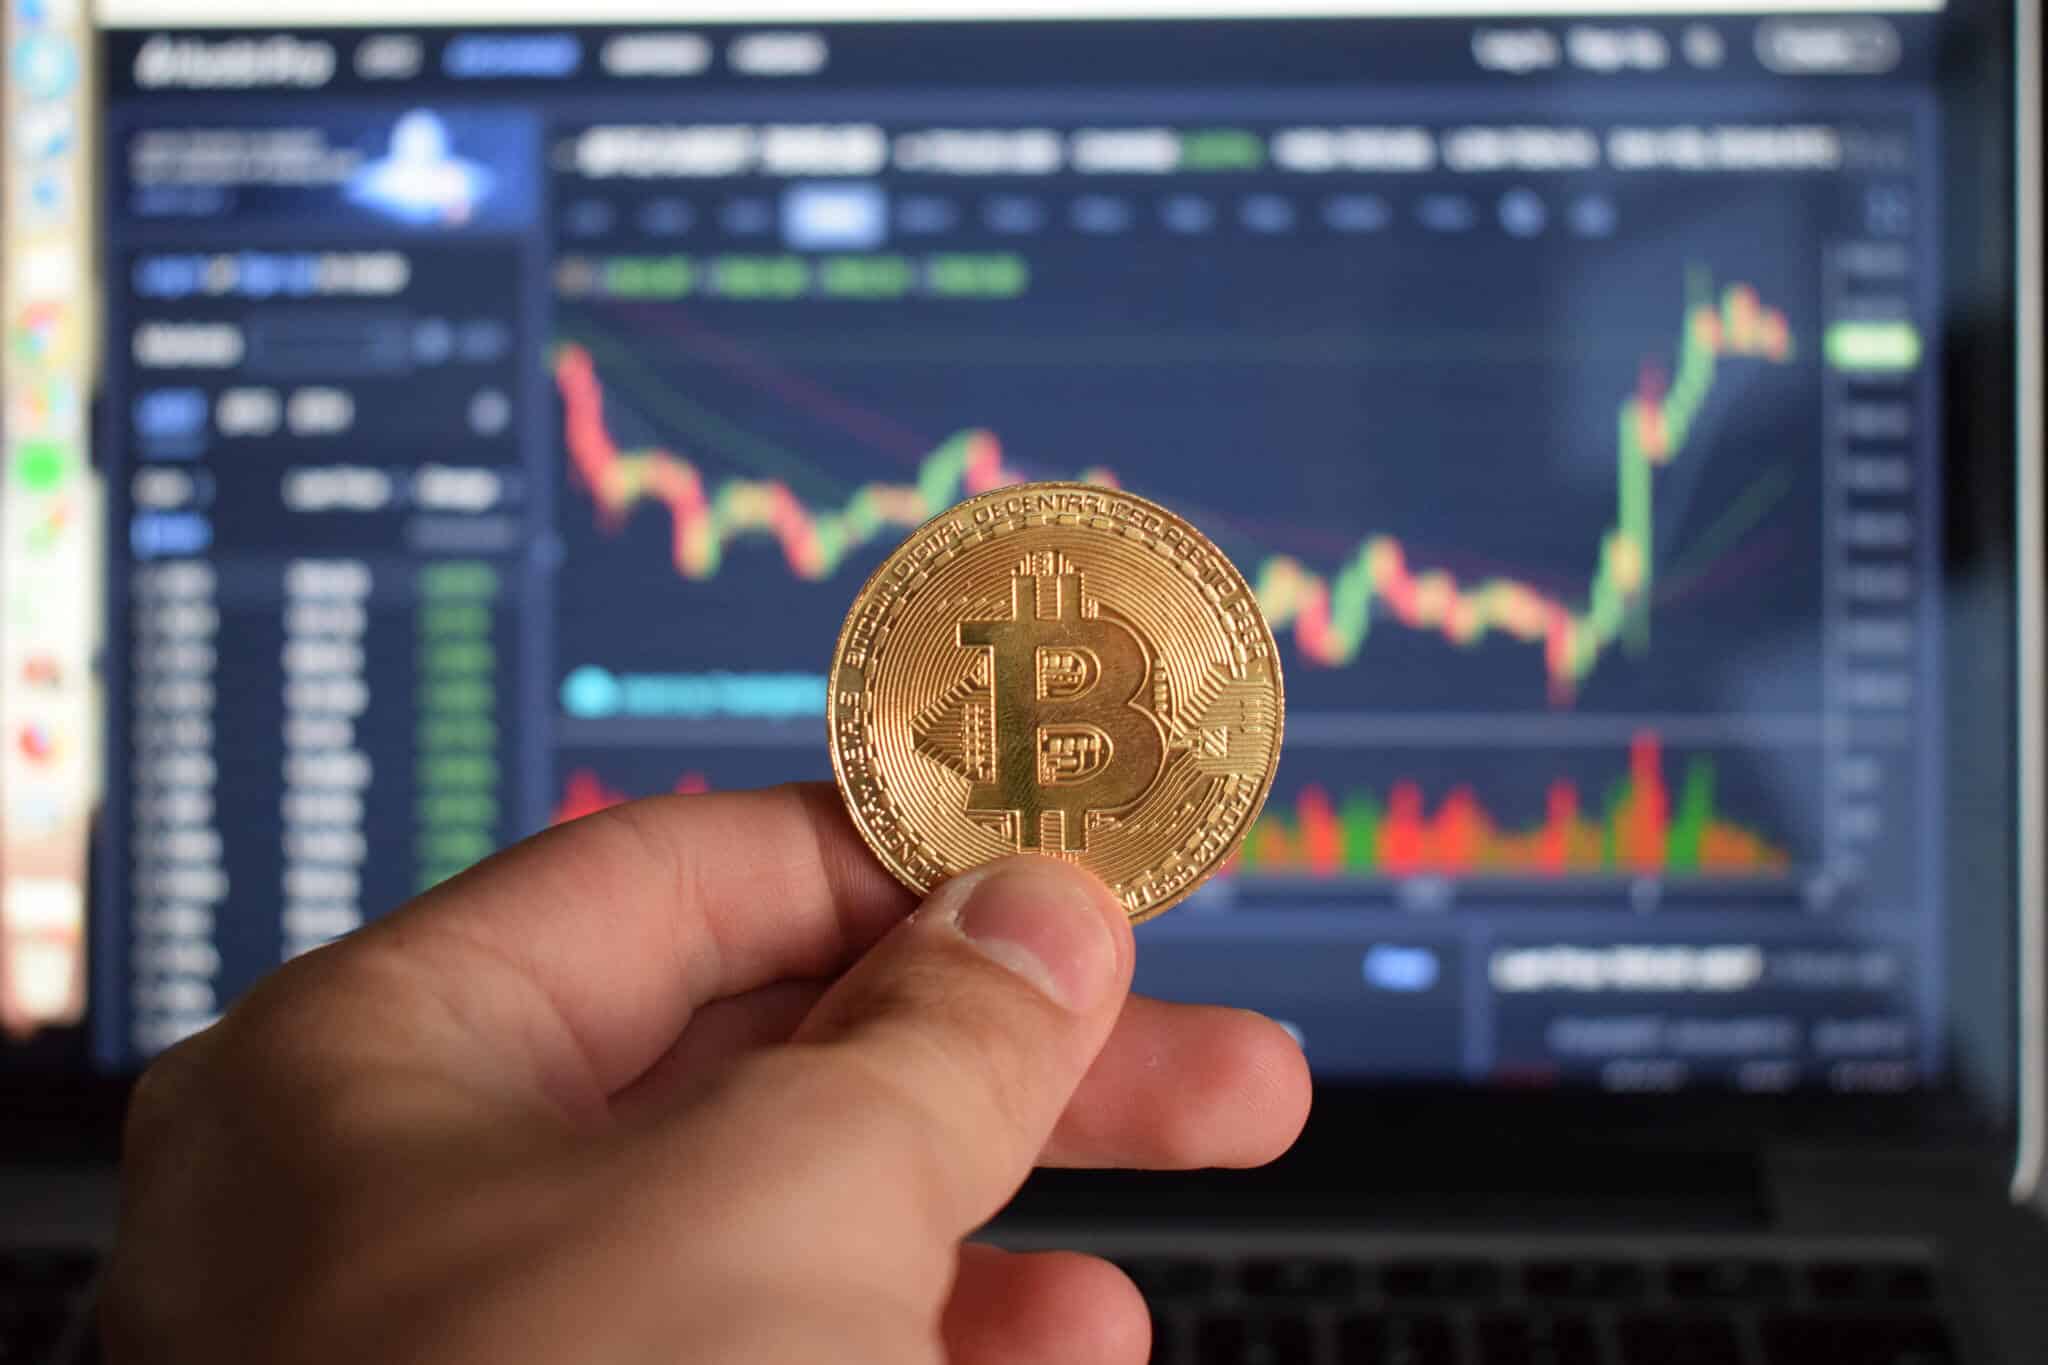 Bitcoin Price to Rise for about $1 Million as Forecasted by Jesse Lund, Head of Blockchain & Digital Currencies at IBM